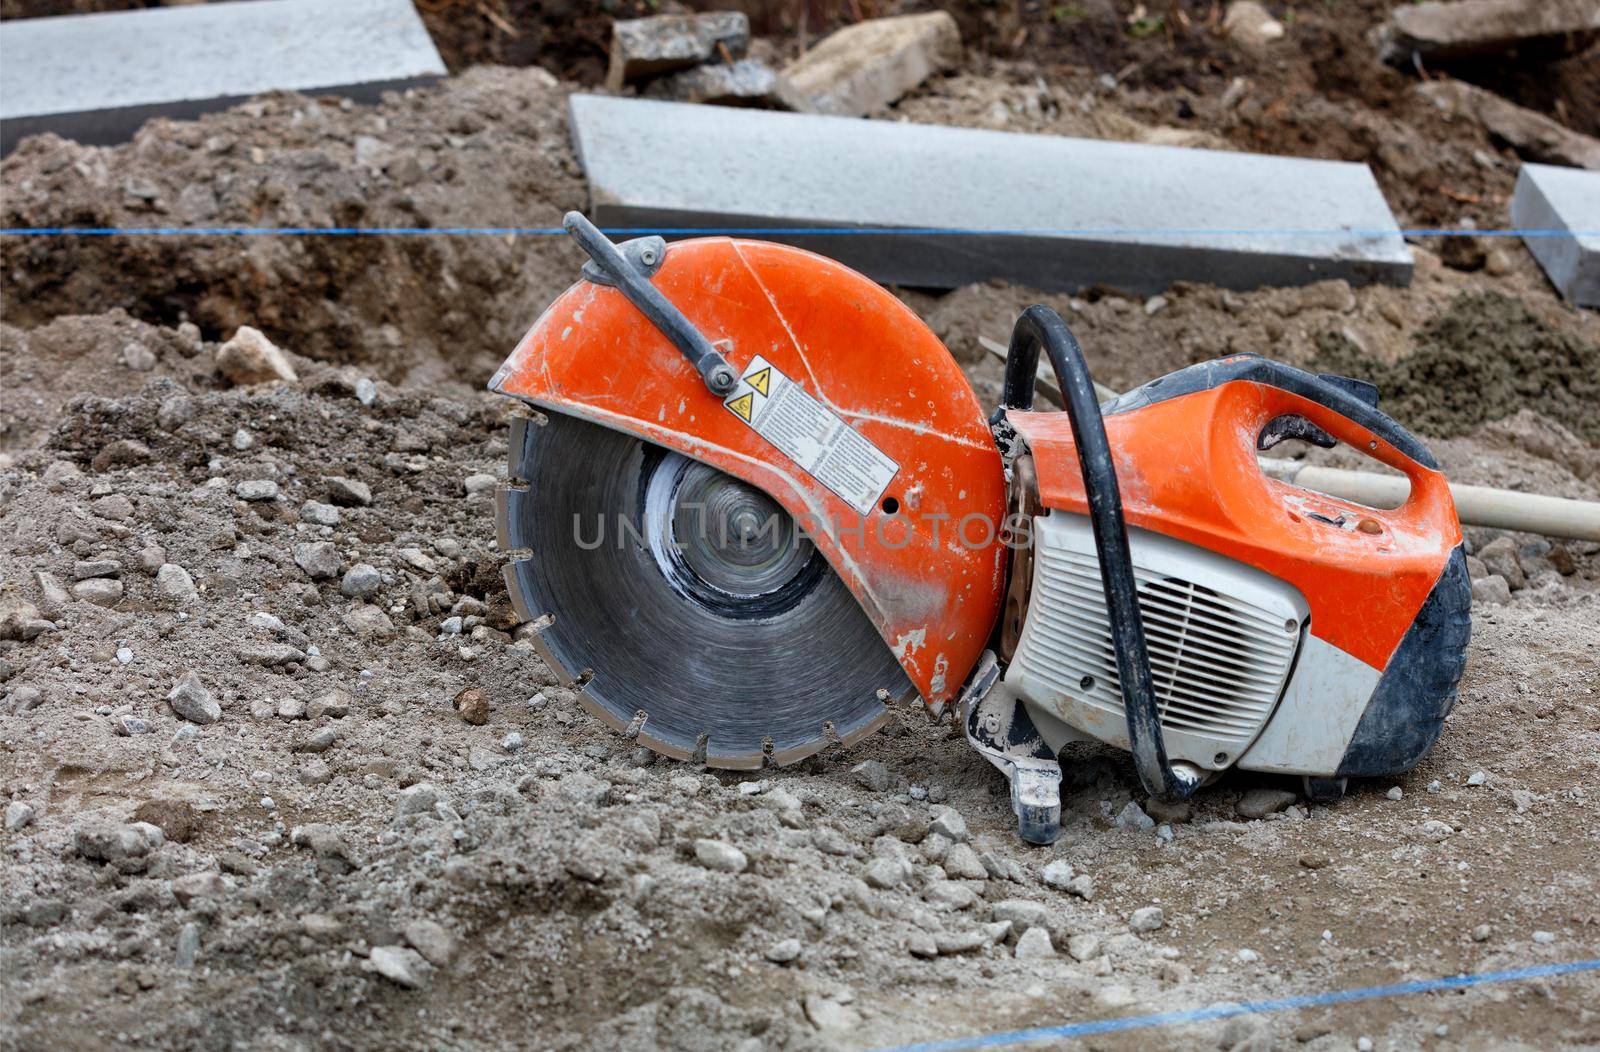 Petrol saw with diamond wheel on construction site gravel in front of concrete parapets. by Sergii